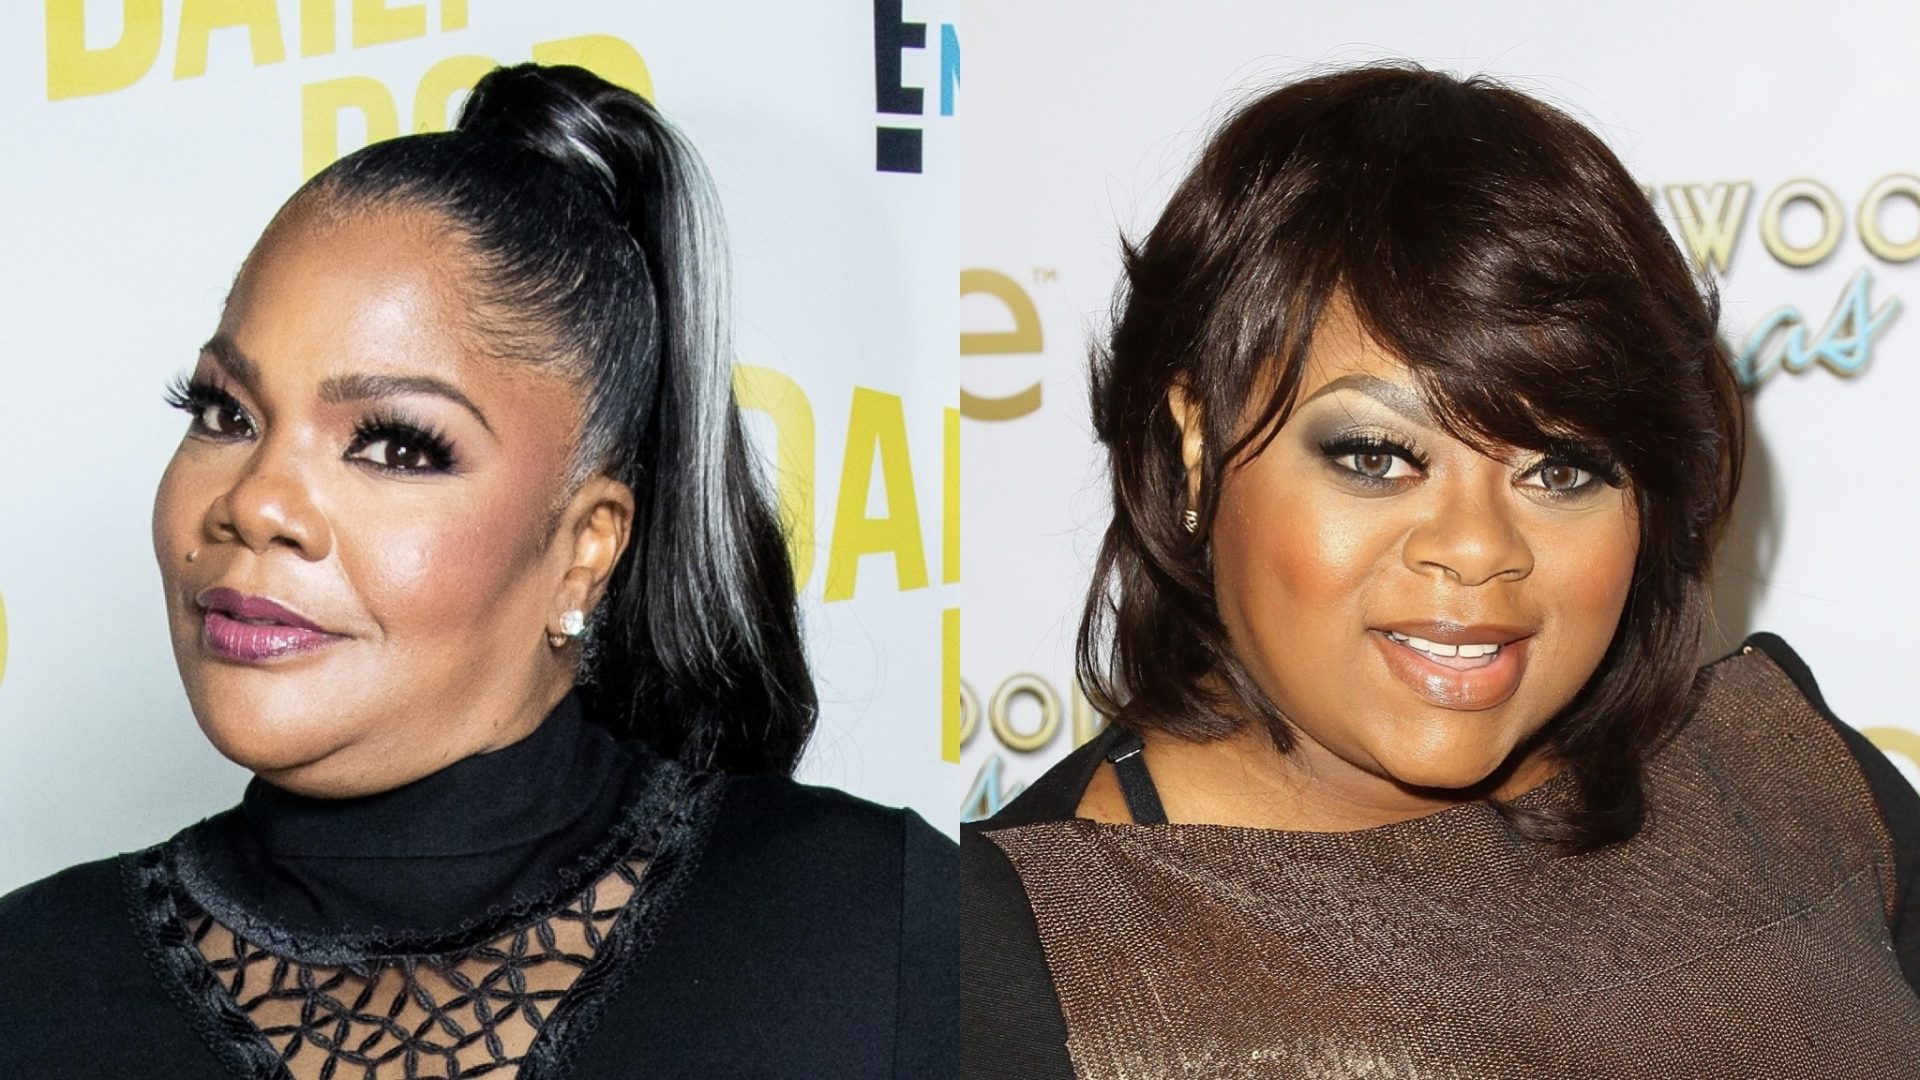 WATCH: Mo’Nique Calls On CBS To Fairly Compensate Her & Countess Vaughn For Their Time On ‘The Parkers’ thumbnail